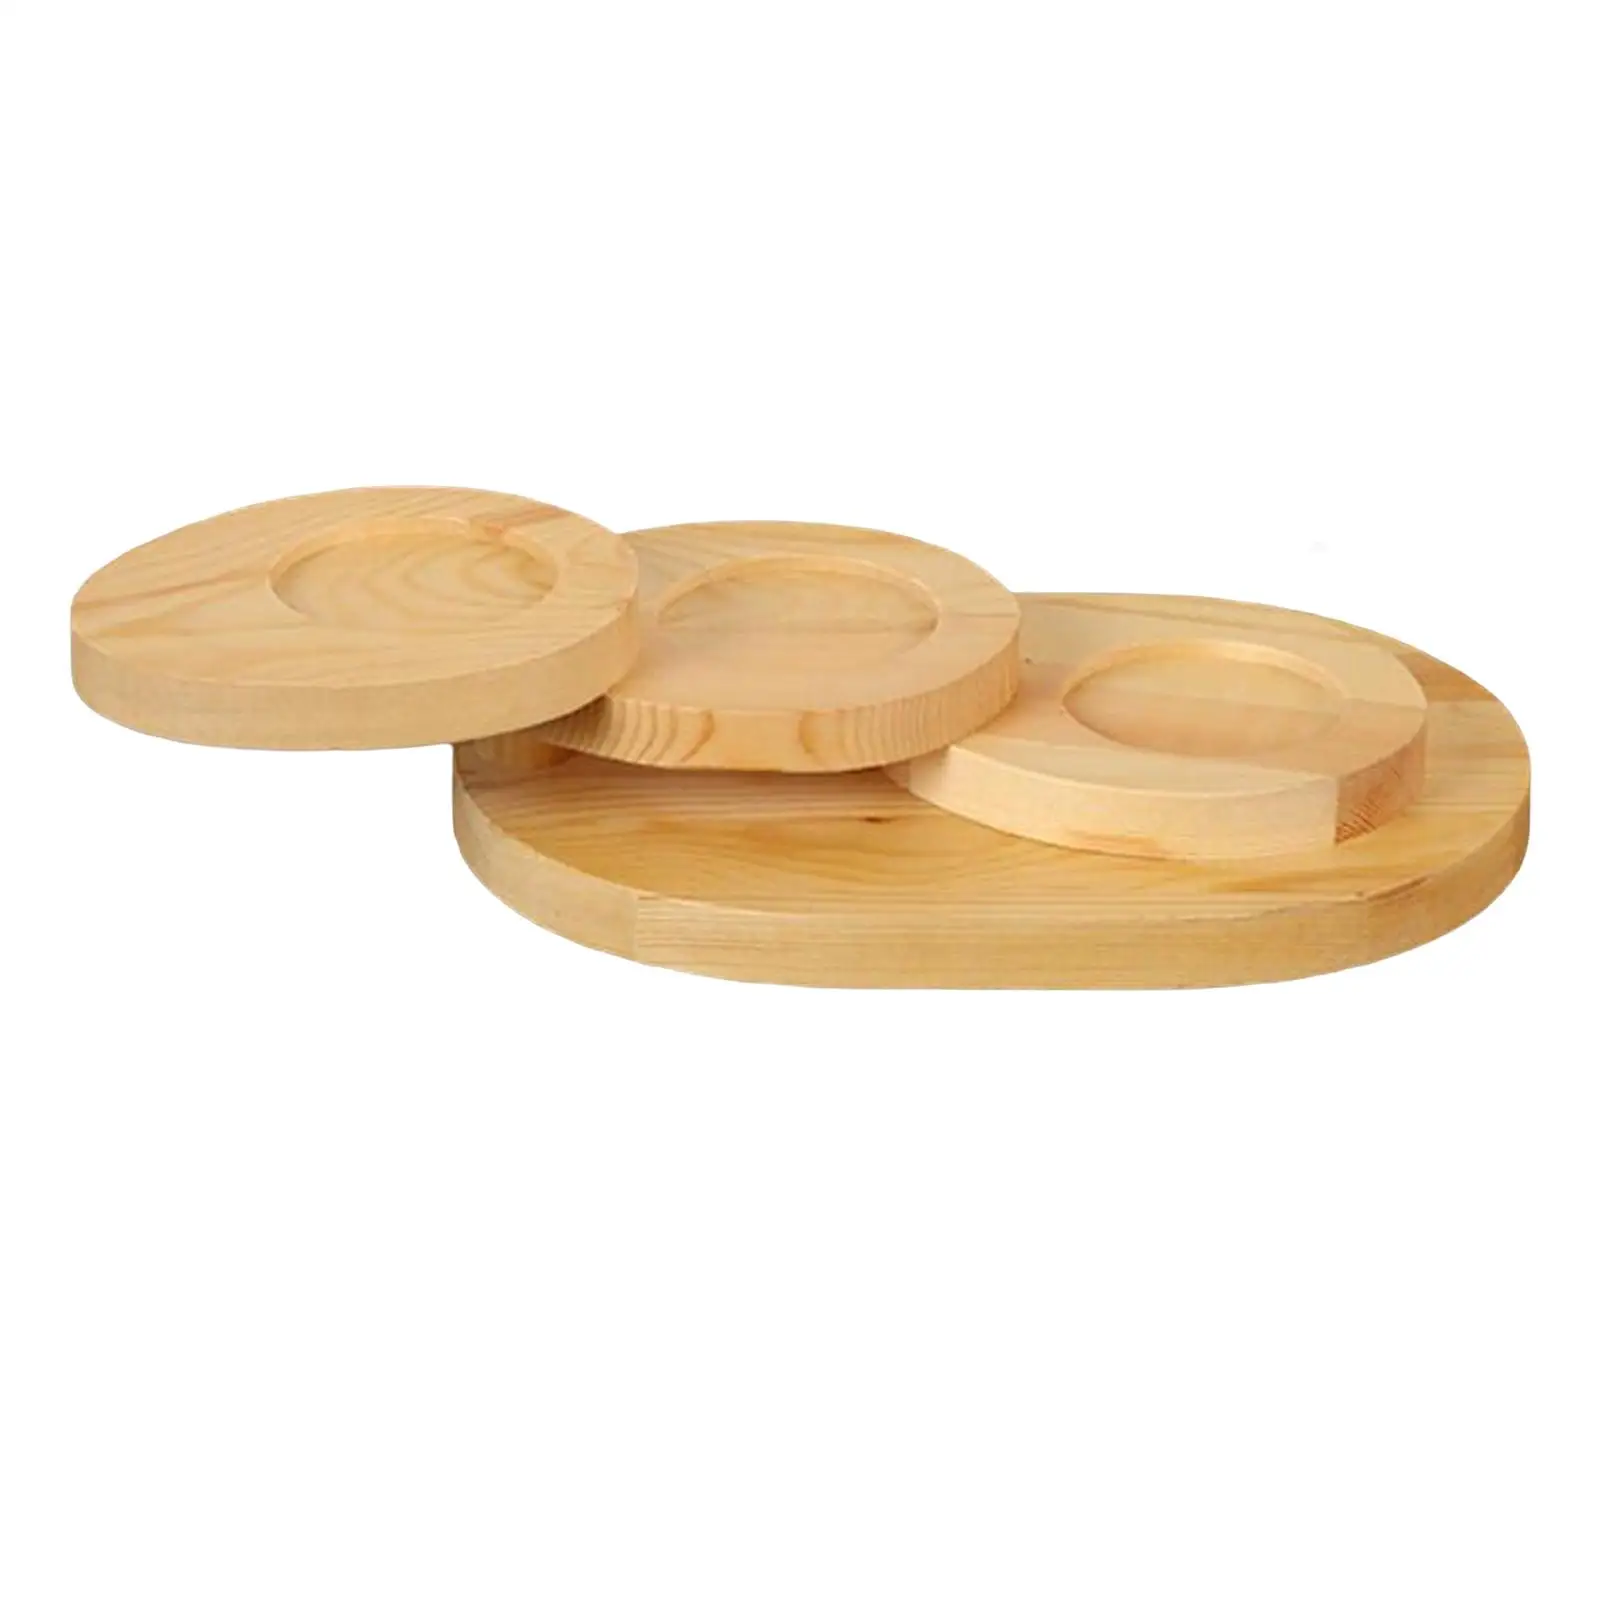 Multifunctional Sushi Serving Tray Succulent Holder Wooden Serving Platters for Christmas